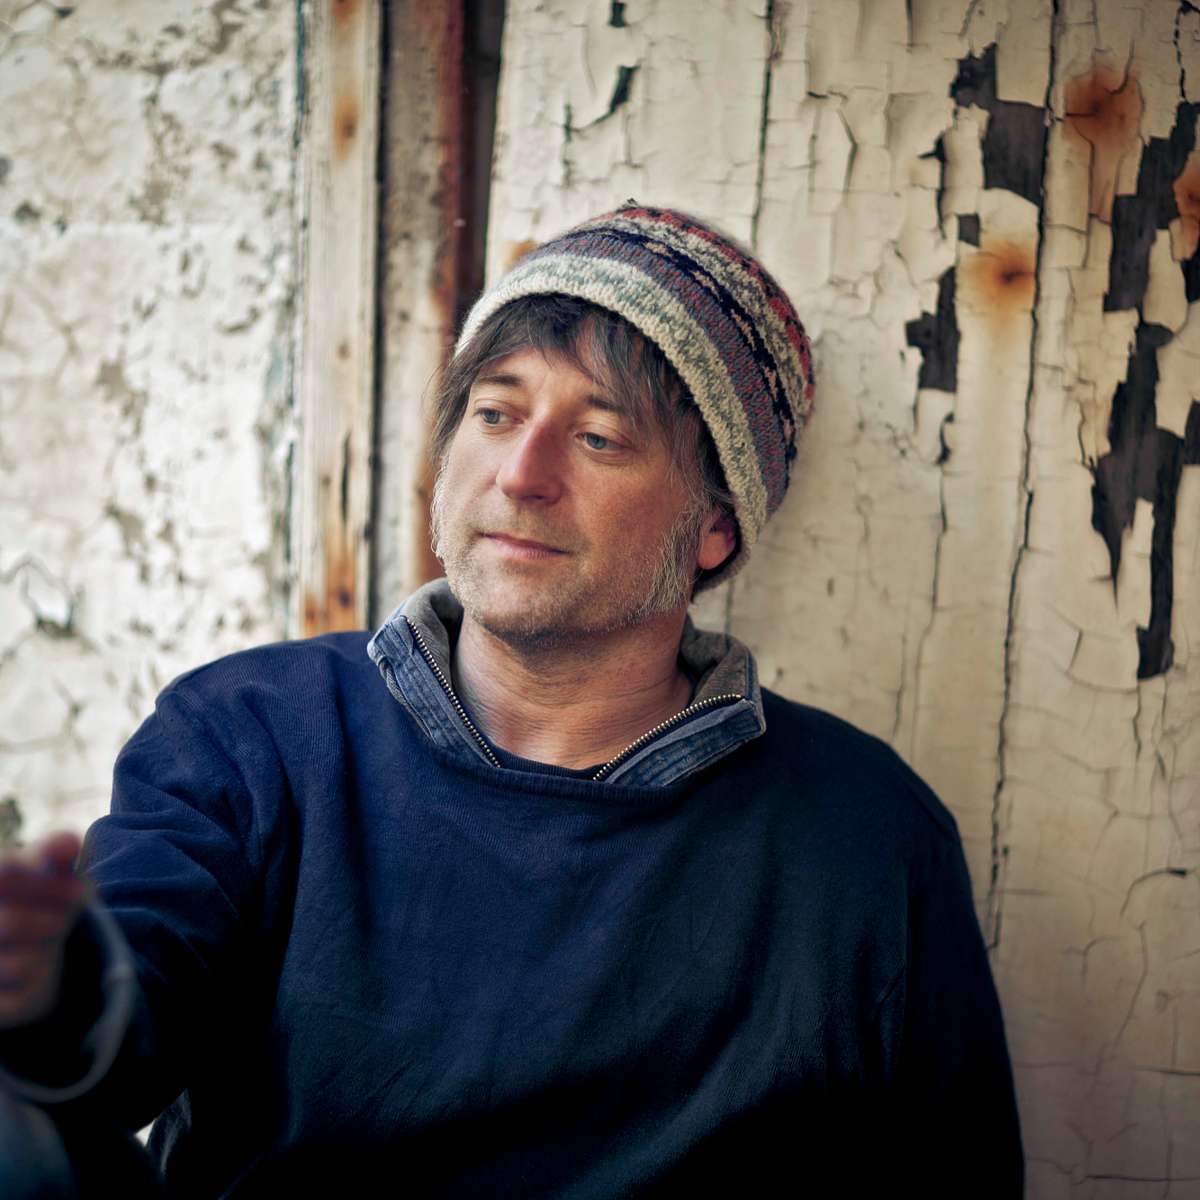 kenny anderson aka king creosote torrent